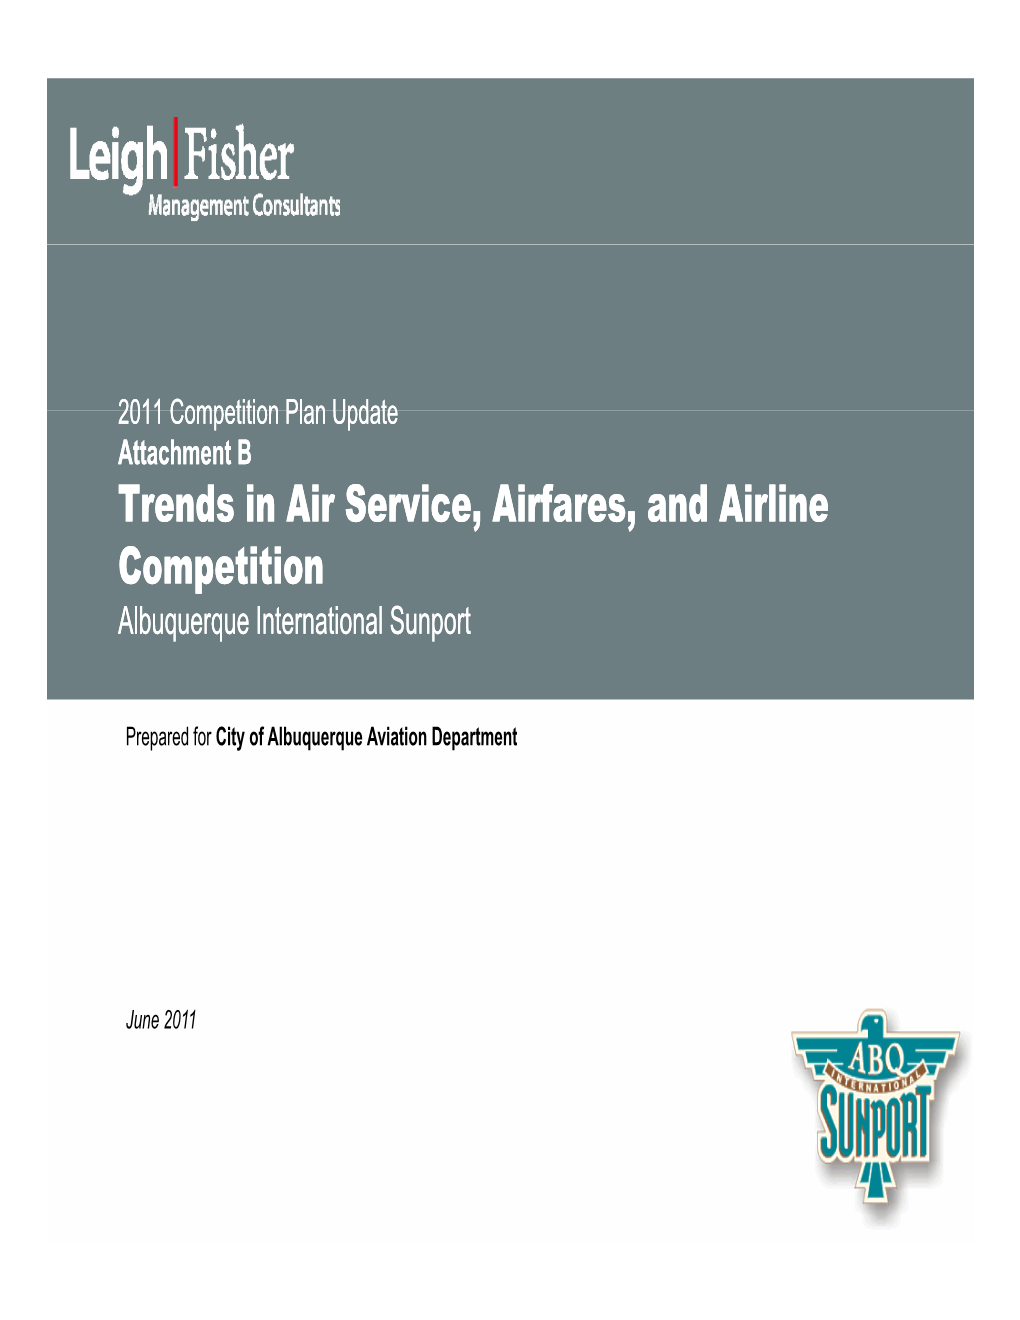 Trends in Air Service, Airfares, and Airline Competition Albuquerque International Sunport